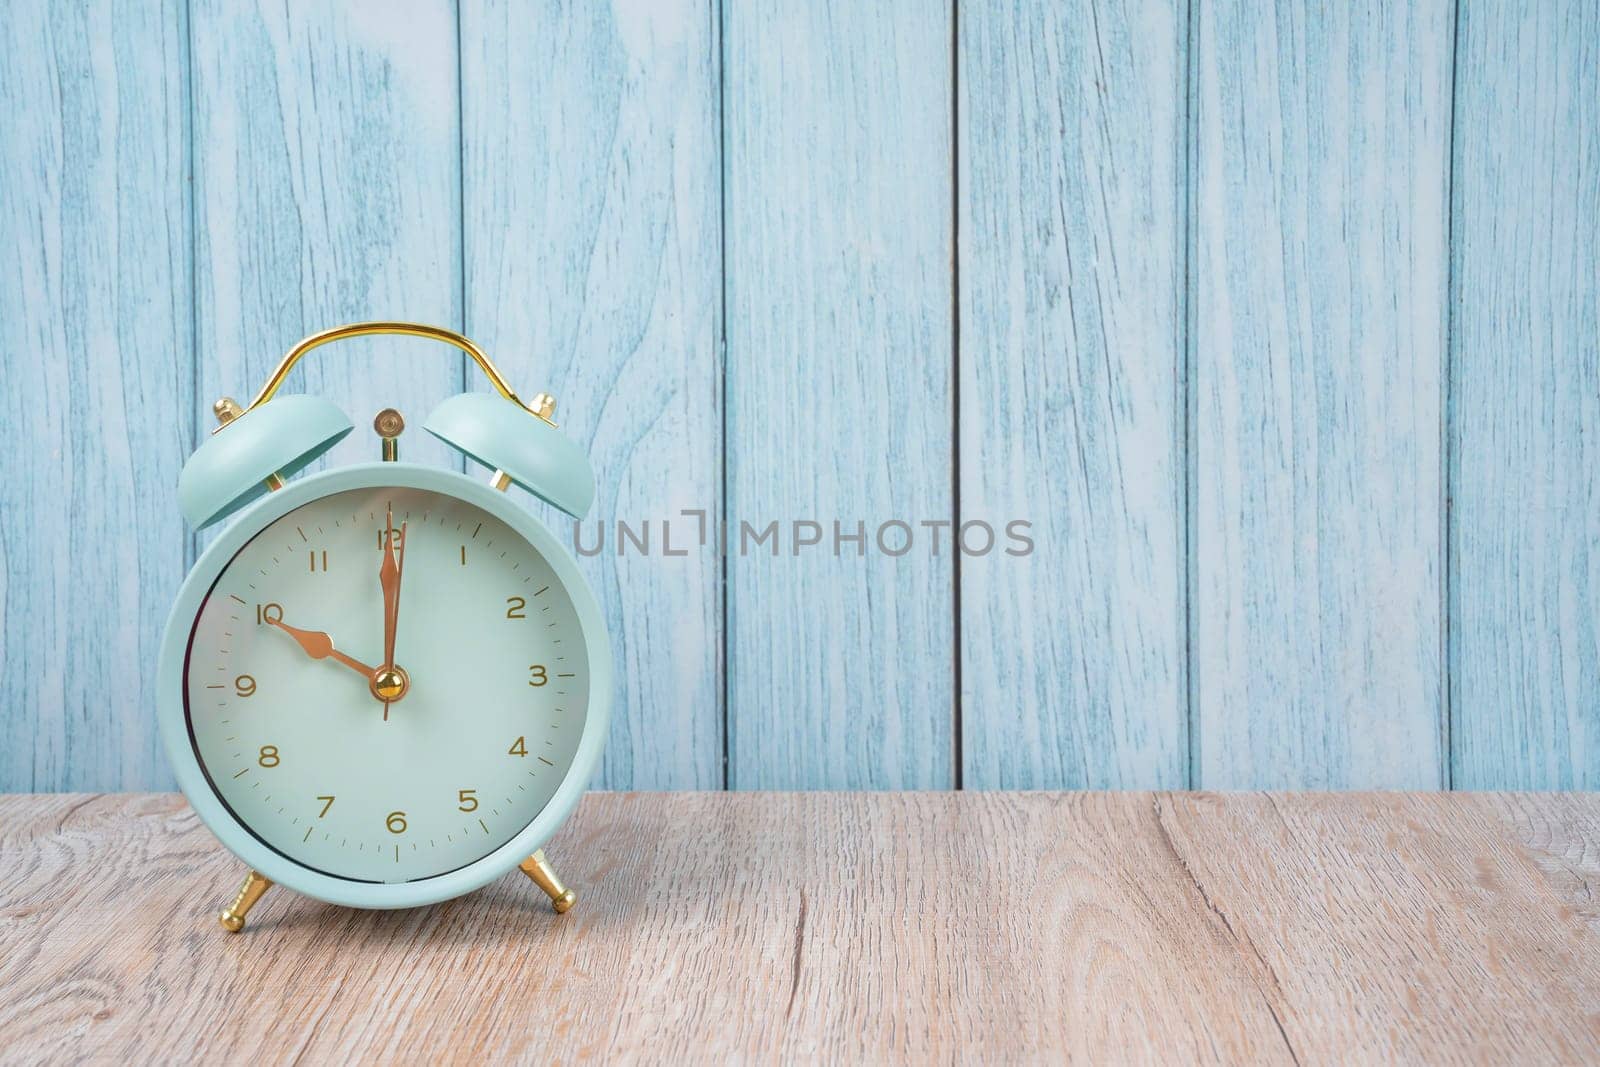 Vintage retro alarm clock ten time 10 o'clock on table wood with dark background.